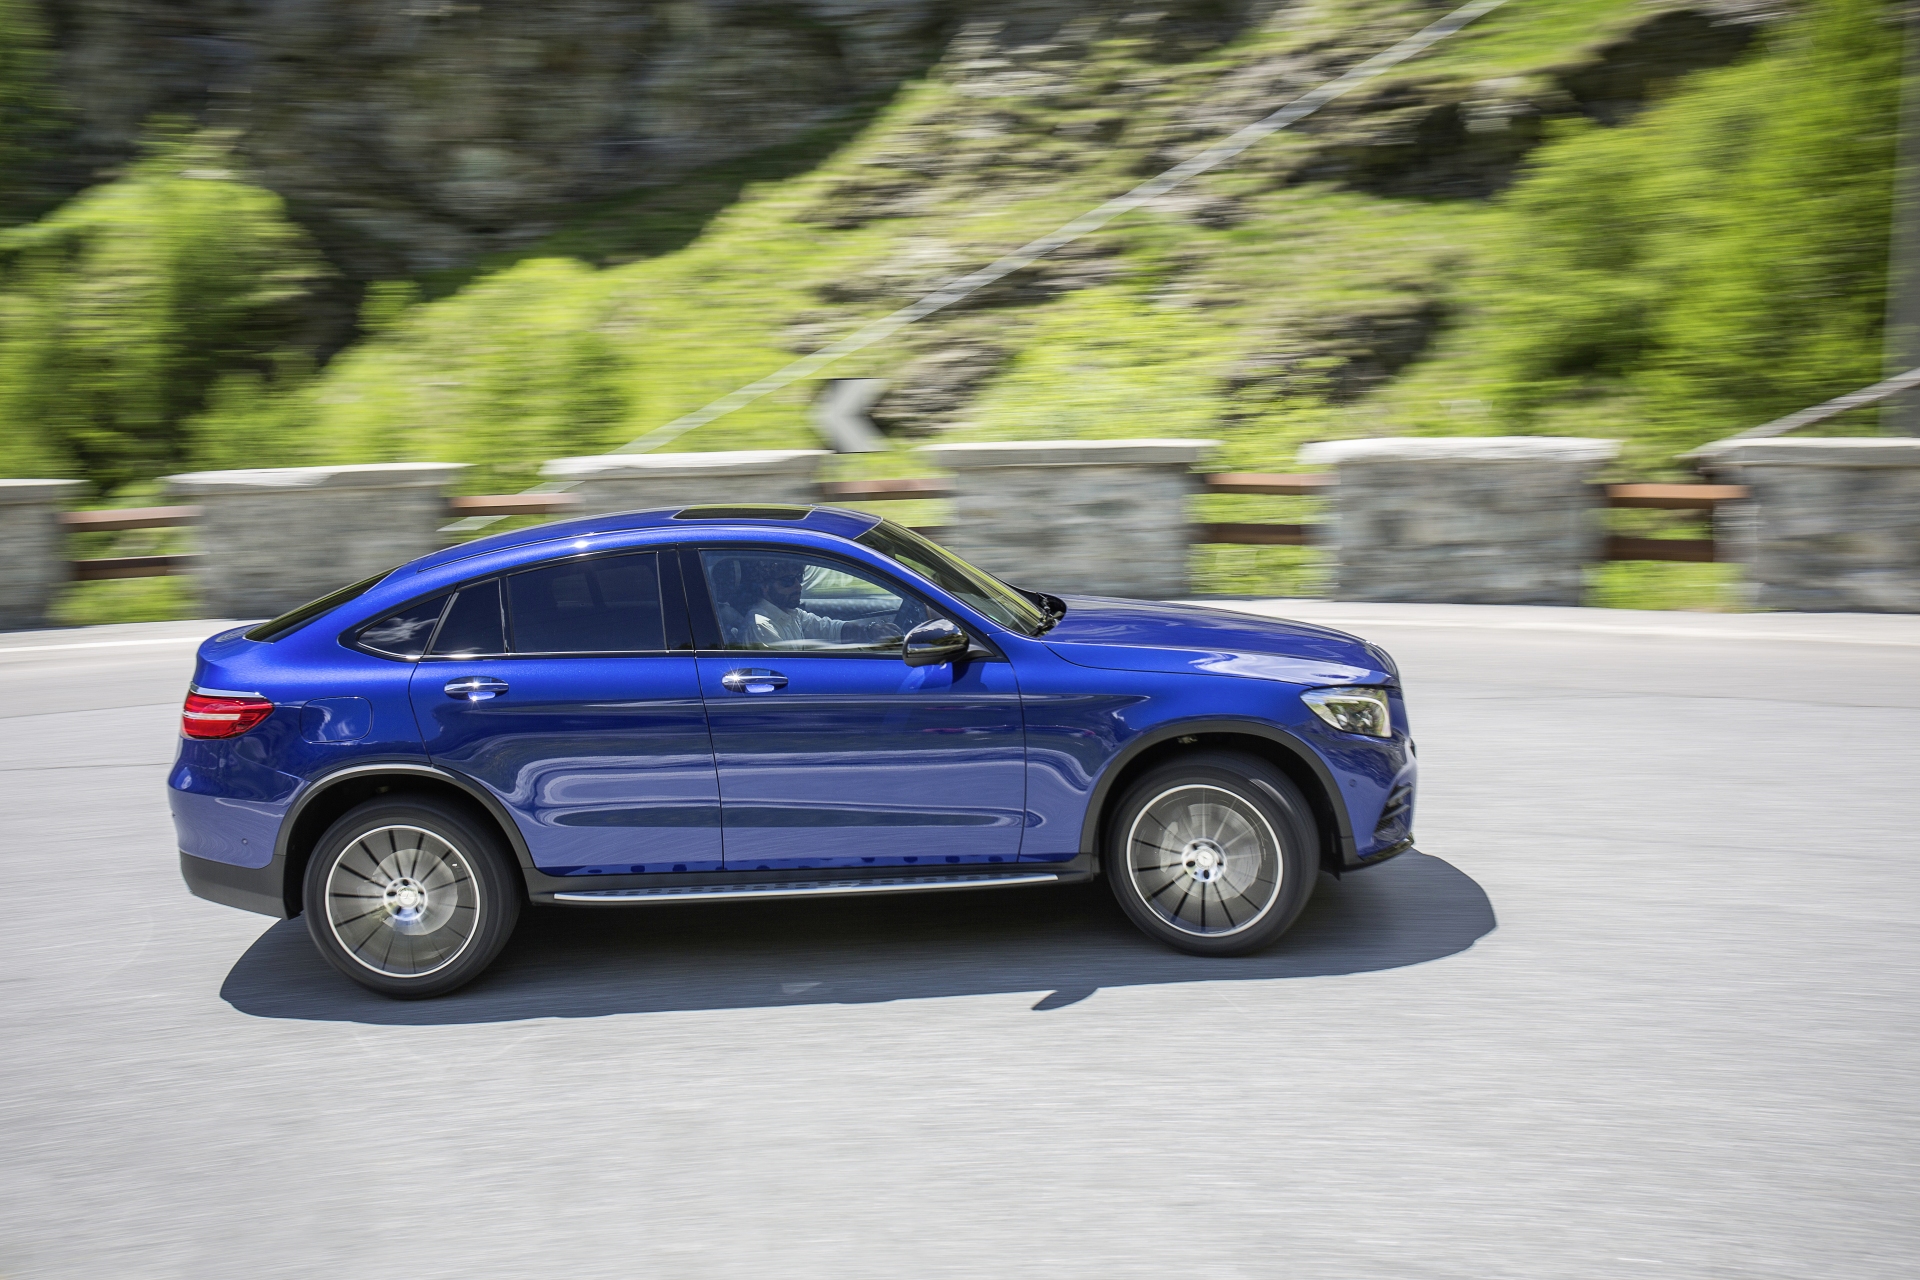 2017 Mercedes-Benz GLC 250 4MATIC Coupe Review - Blue Exterior - Side View - Dynamic